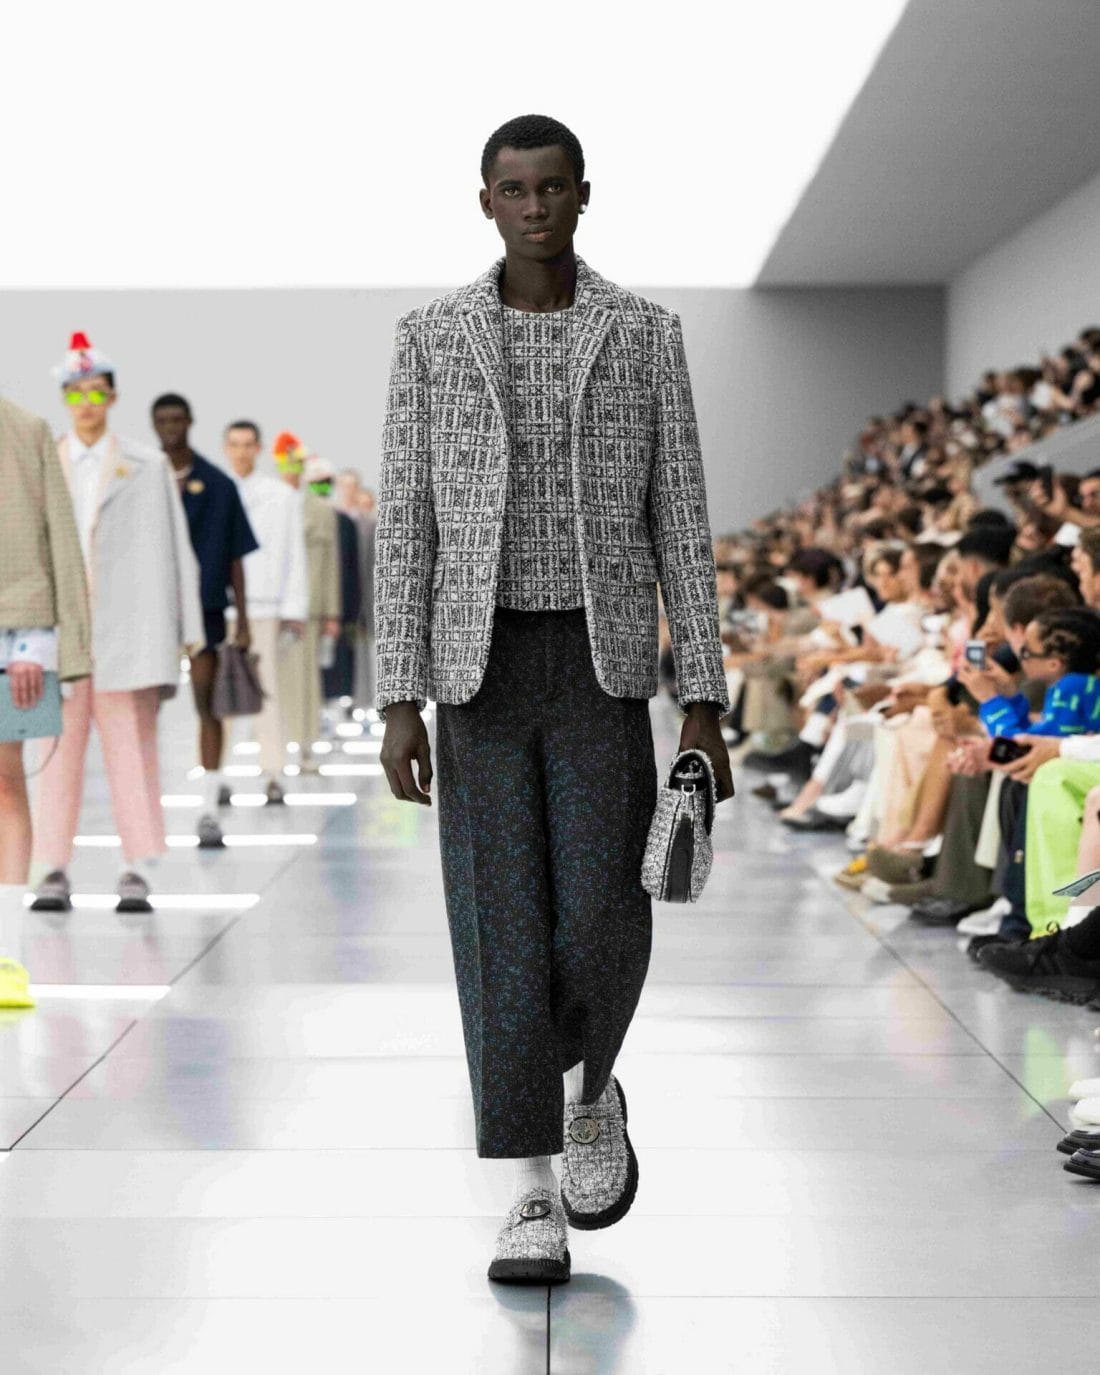 Cha Eunwoo's look for the Dior Summer 2024 show wins the internet